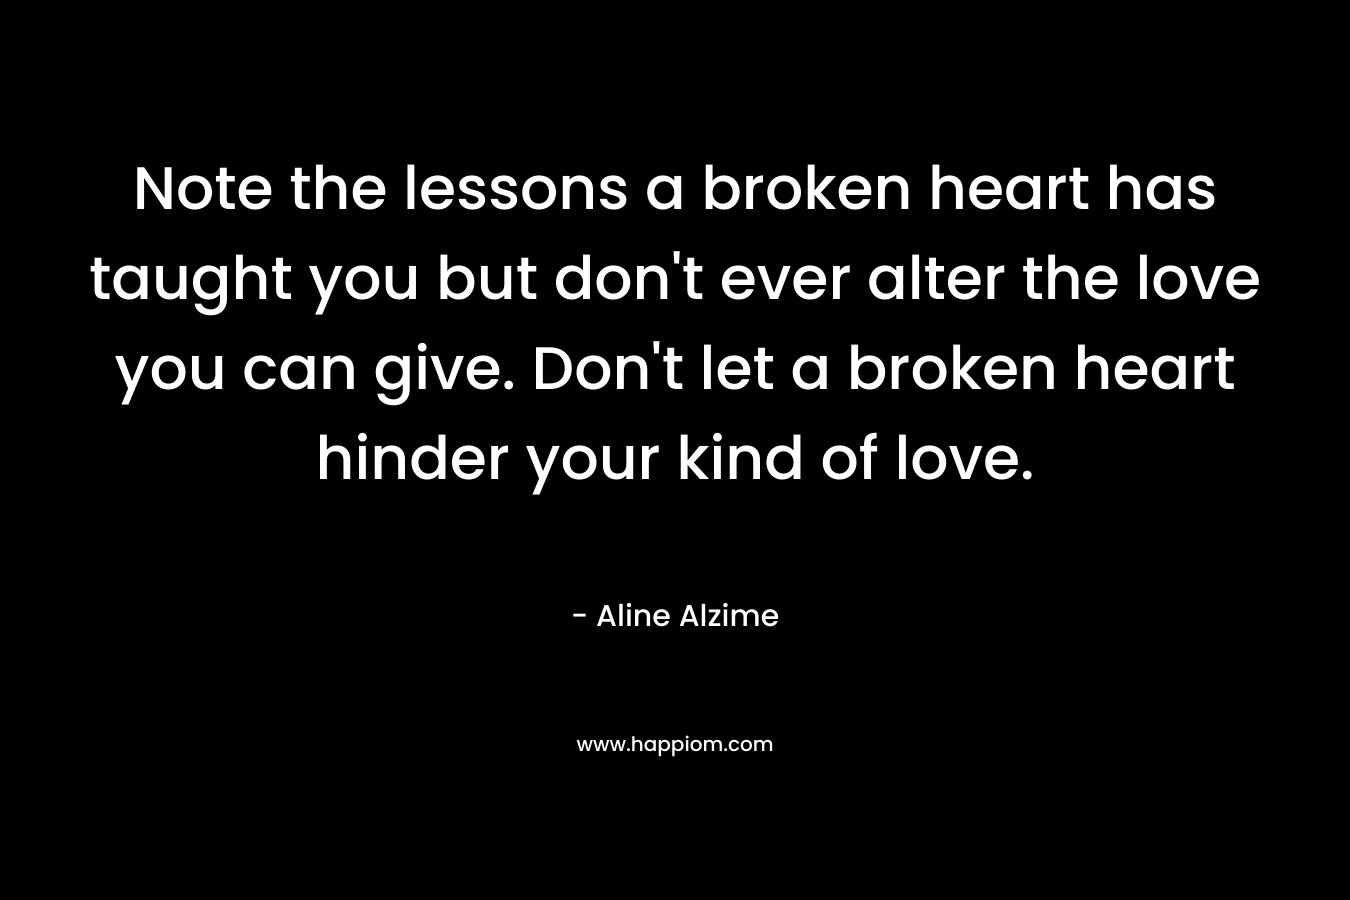 Note the lessons a broken heart has taught you but don’t ever alter the love you can give. Don’t let a broken heart hinder your kind of love. – Aline Alzime